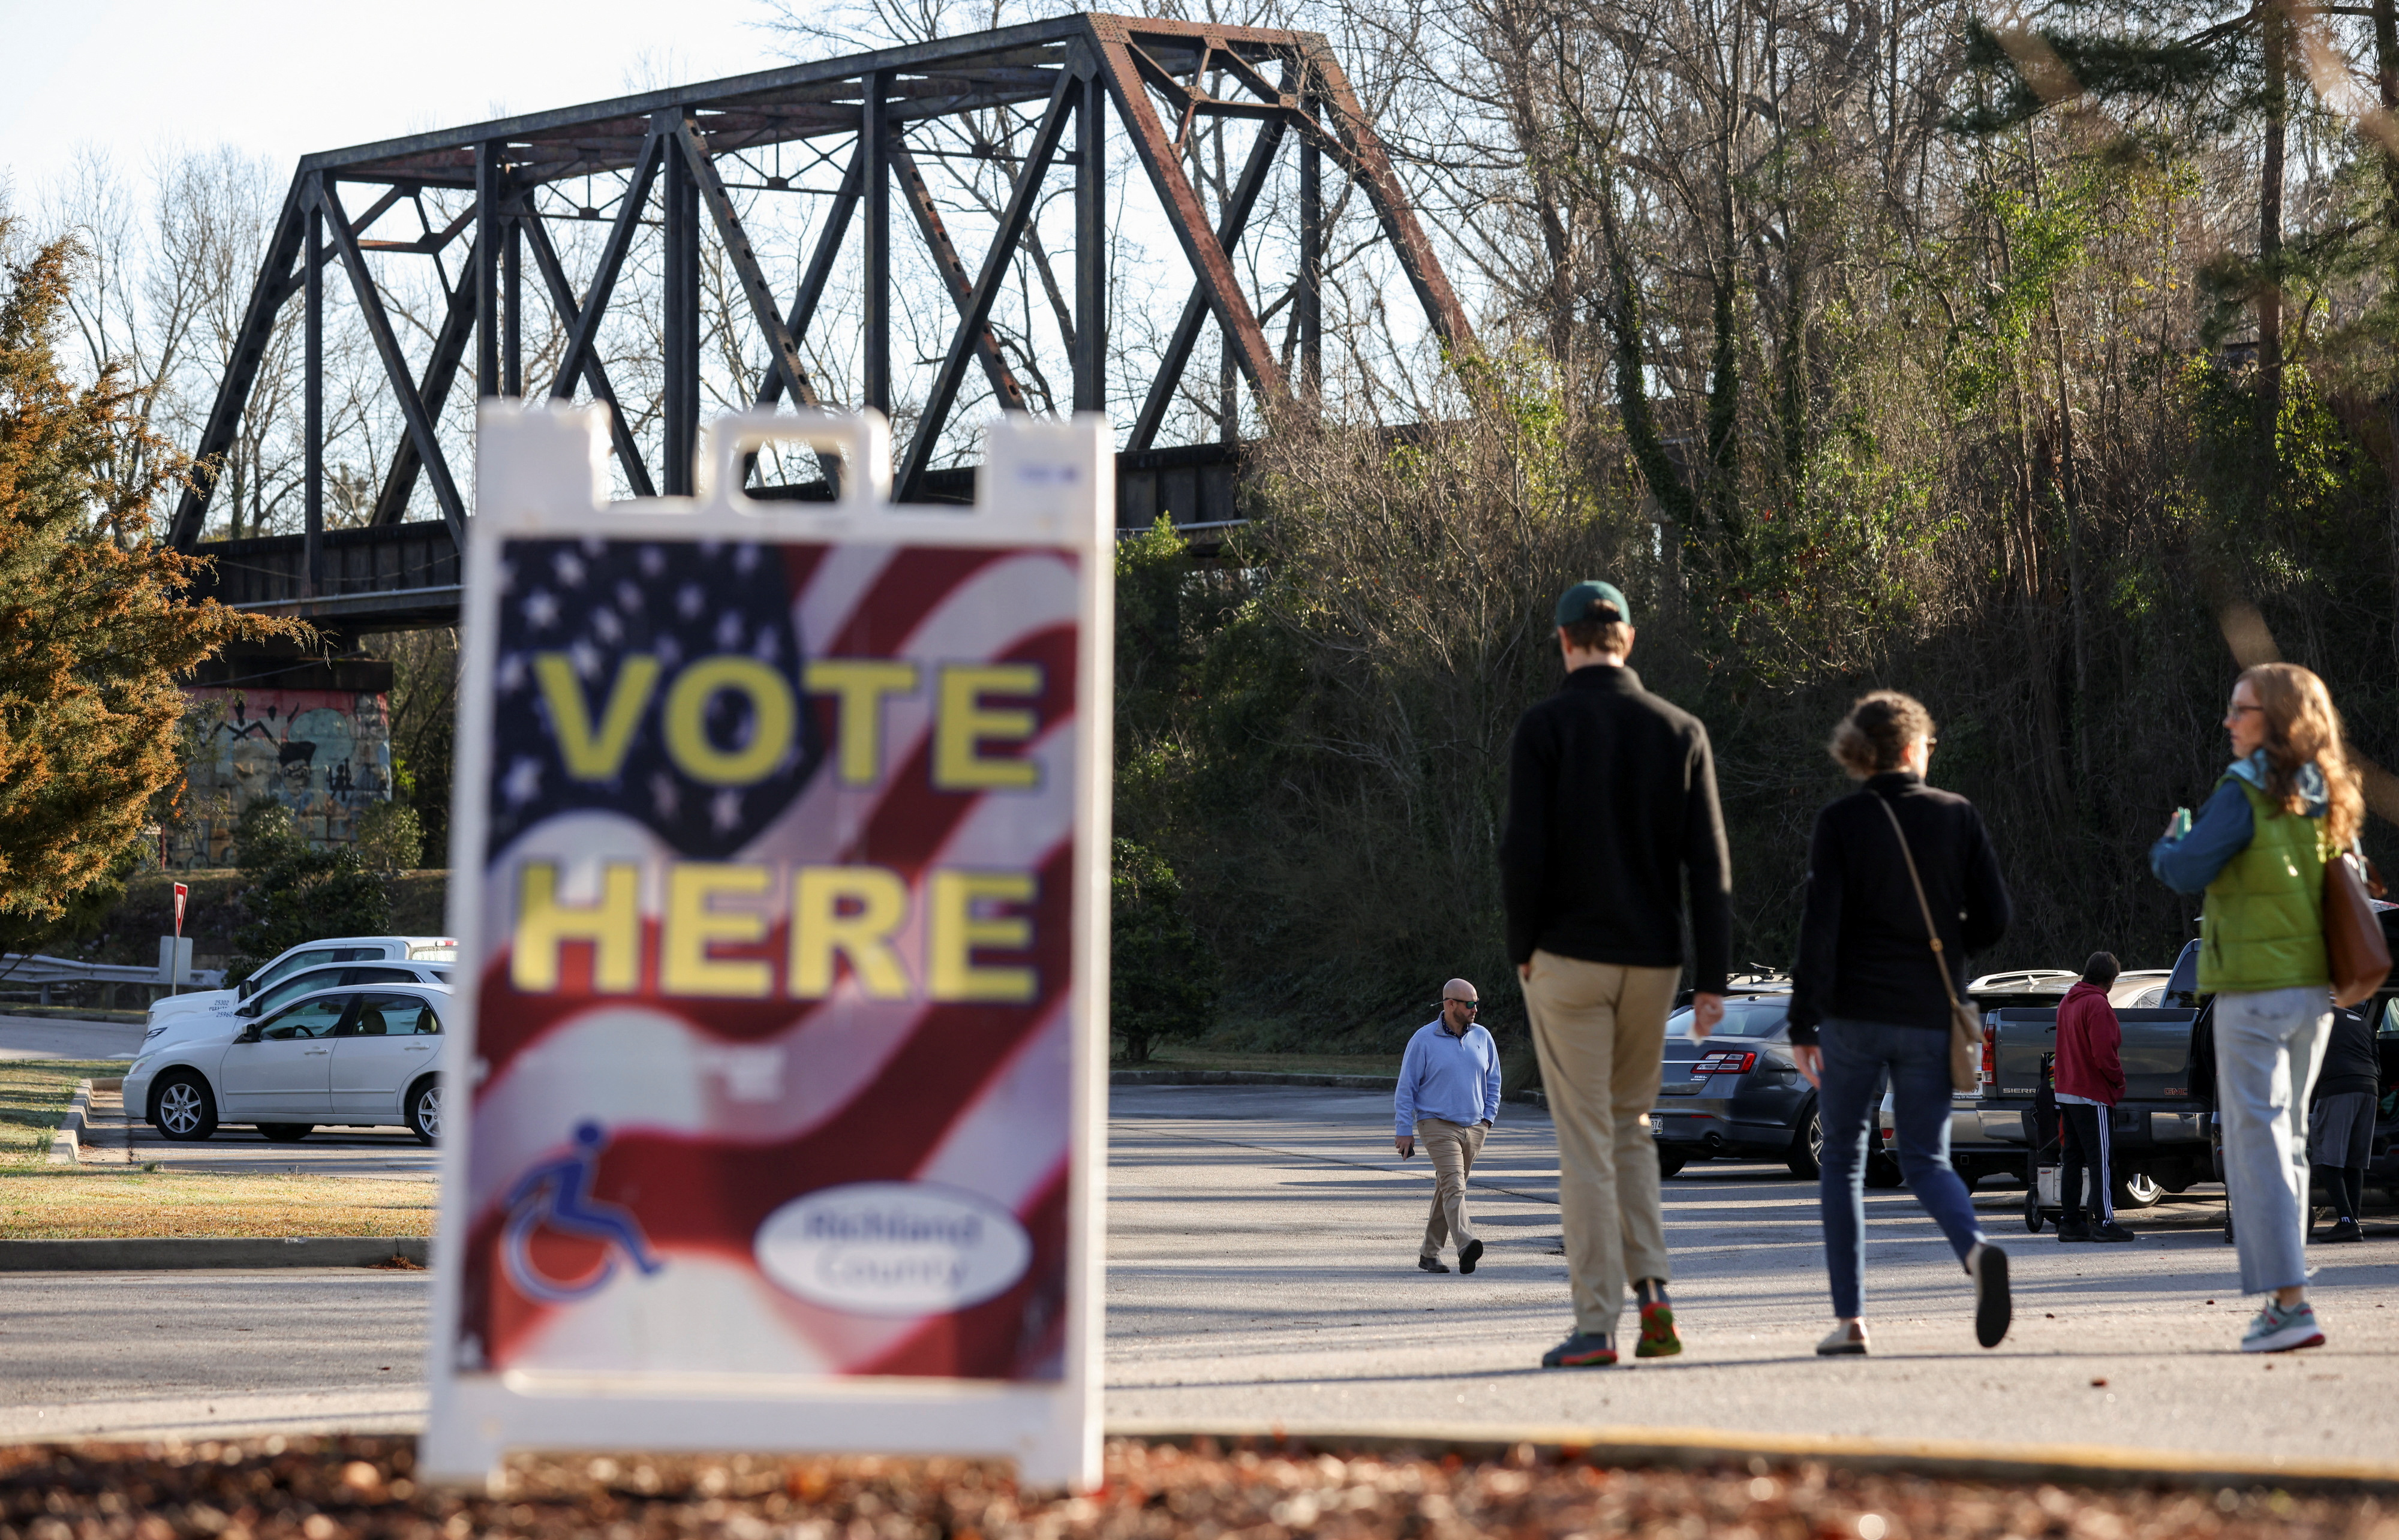 Voters cast their ballots in South Carolina republican presidential primary